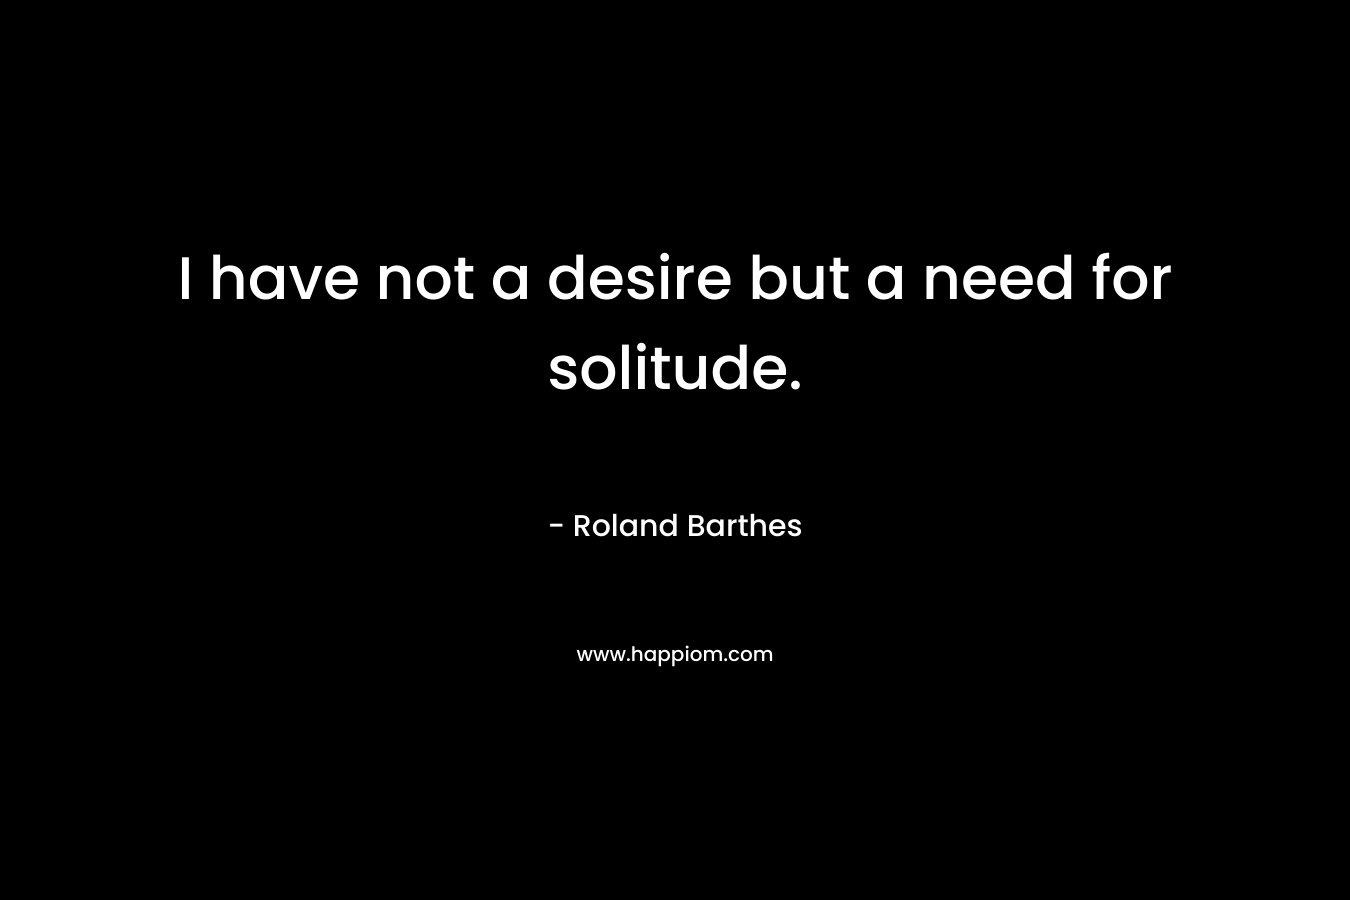 I have not a desire but a need for solitude.